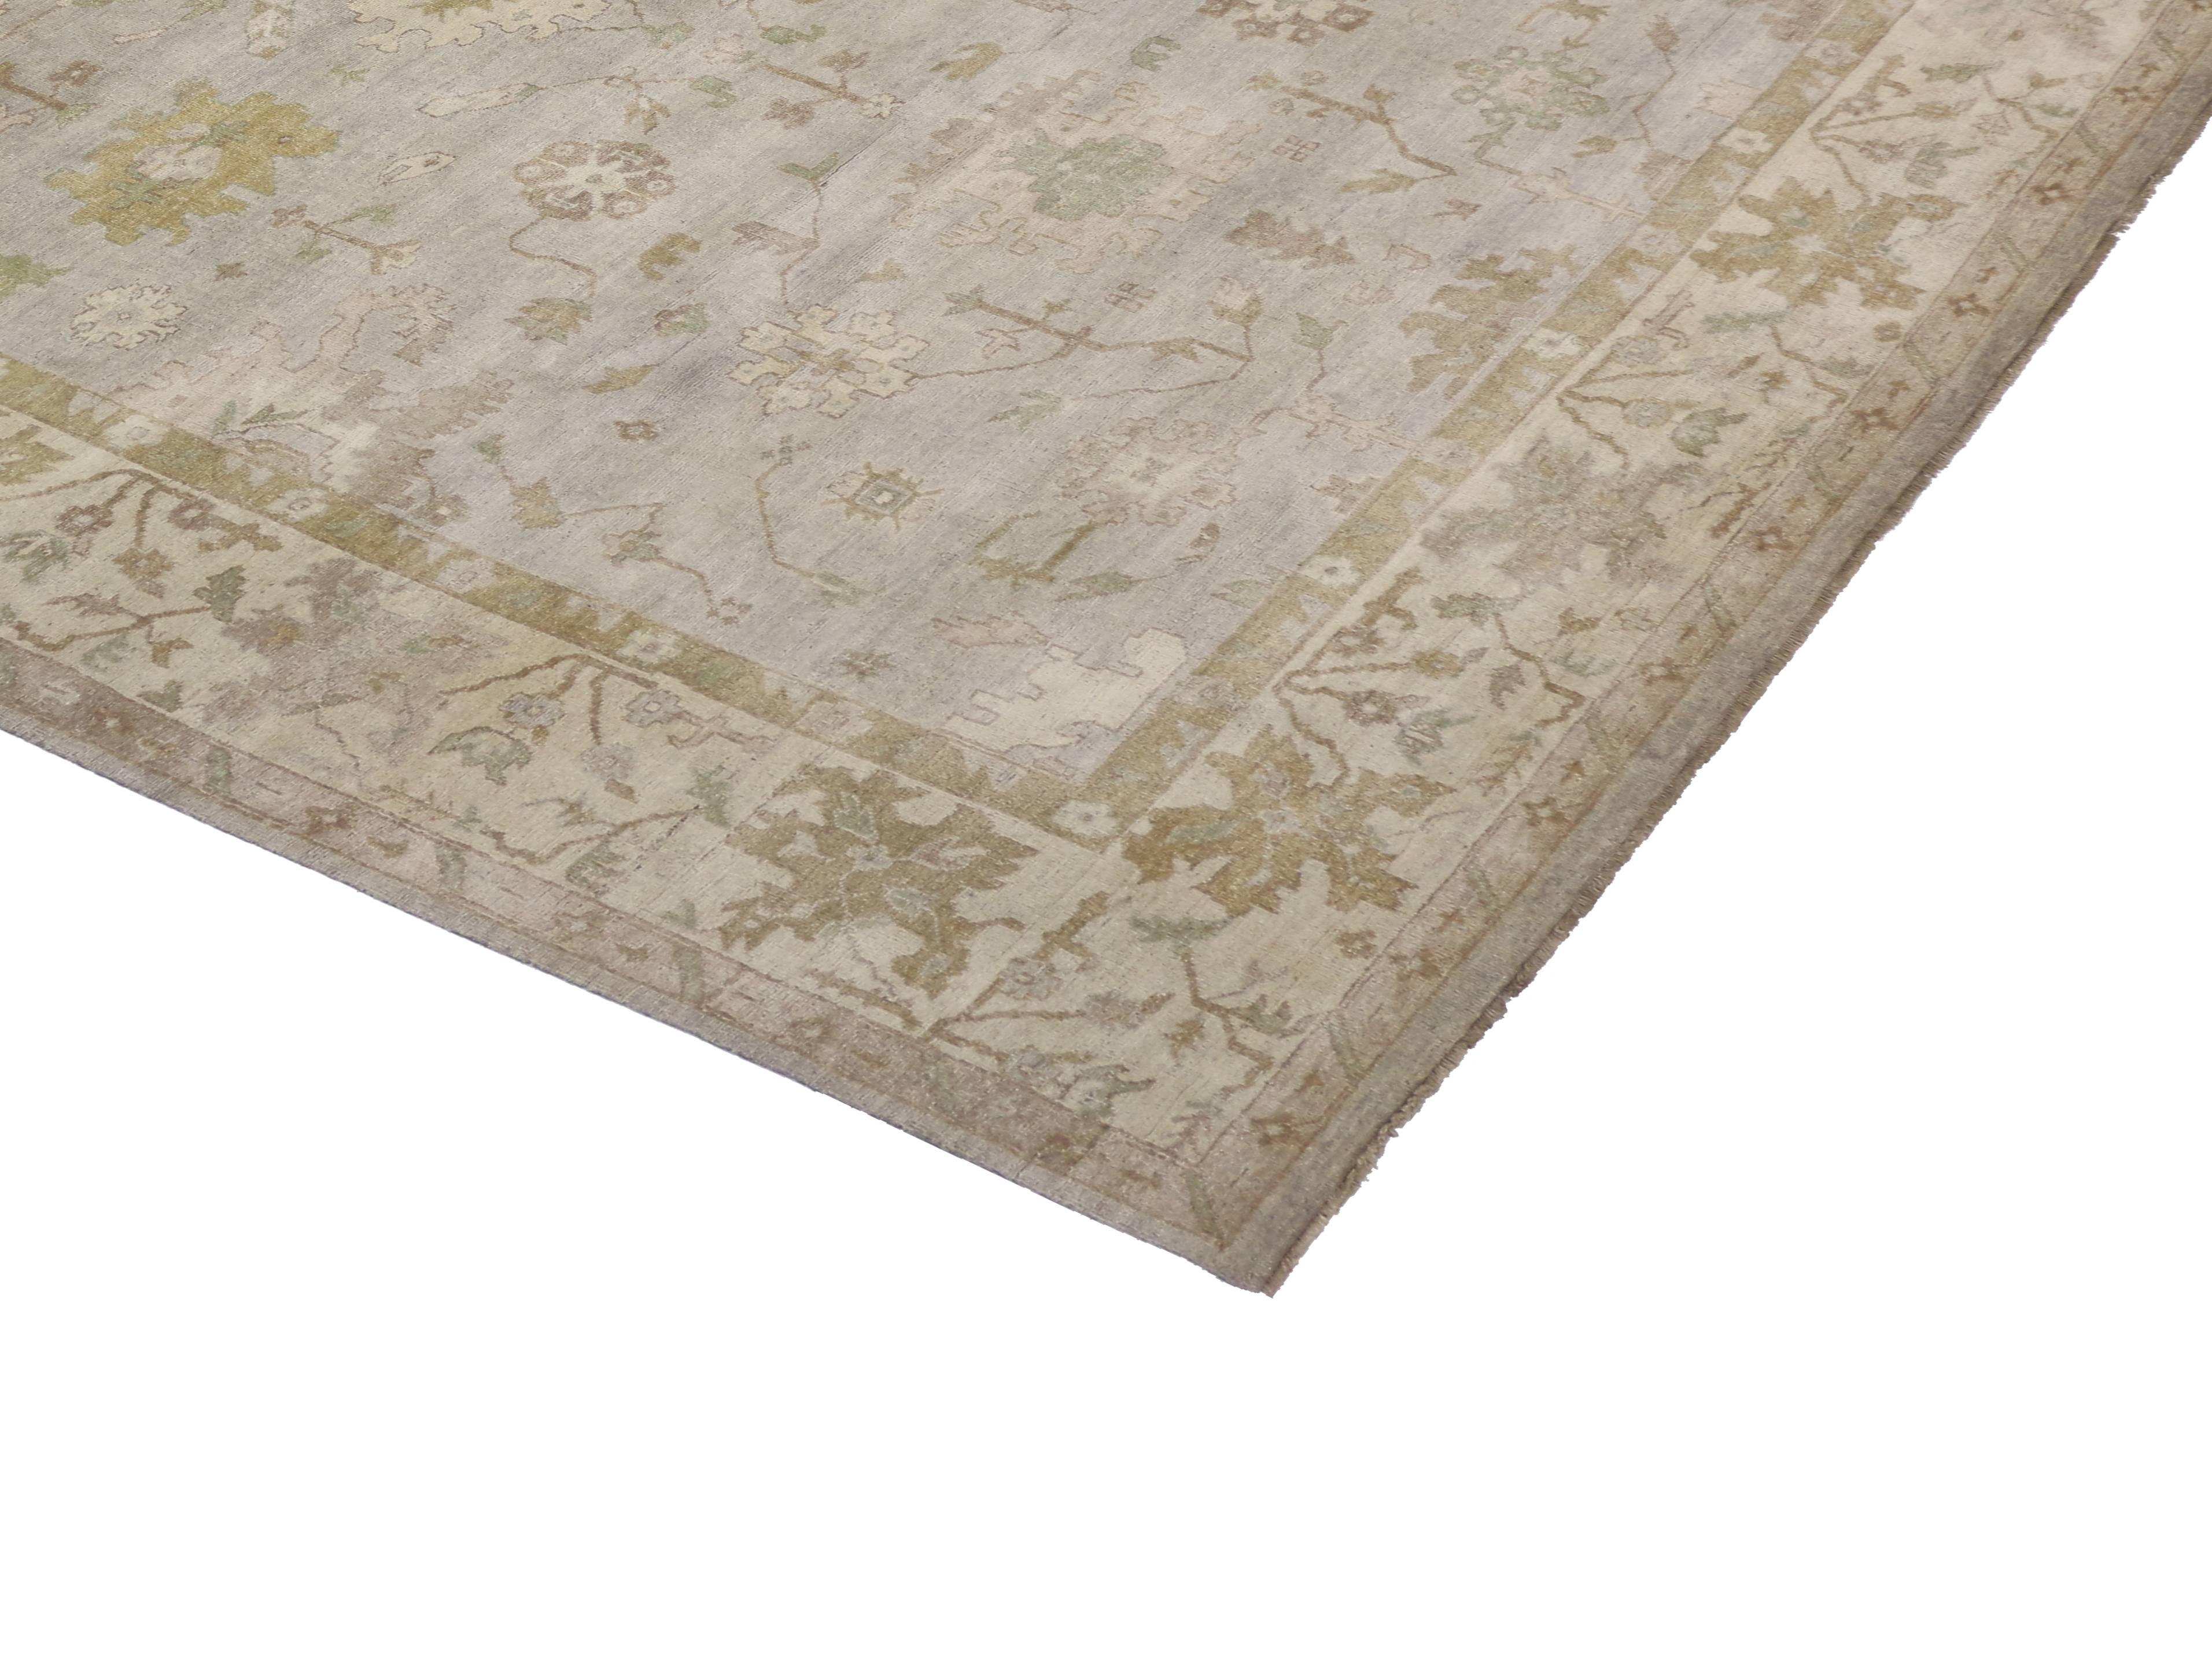 30065 New Contemporary Oushak Style with Coastal Cottage Southern Living Style. This hand-knotted wool large transitional area rug features an Oushak design in light colors. It is sophisticated and subtle while blending traditional with modern